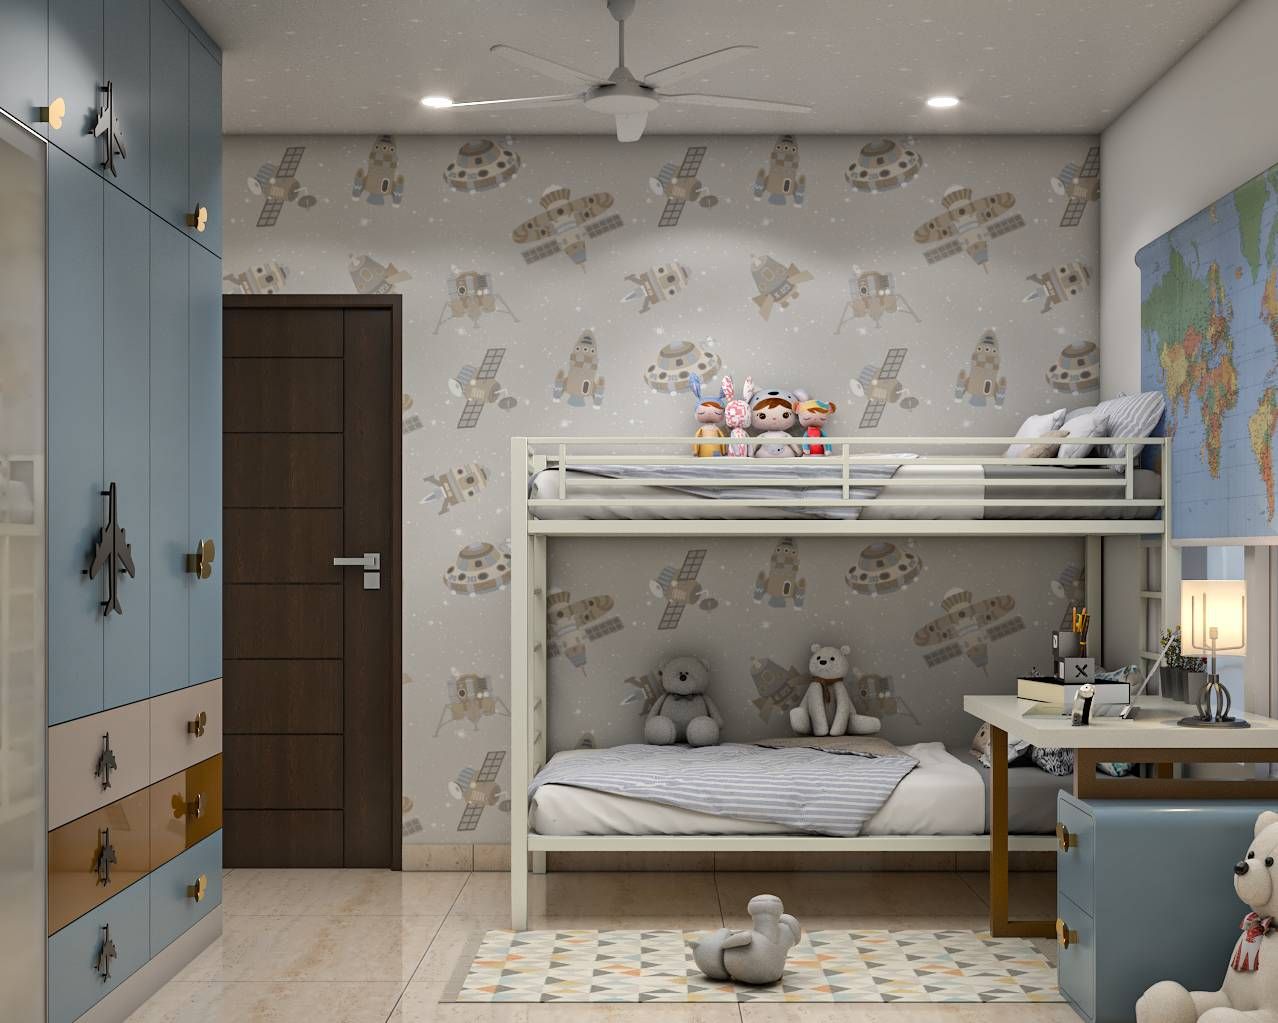 Modern Kids Room Design With A Bunk Bed And Sliding Wardrobe